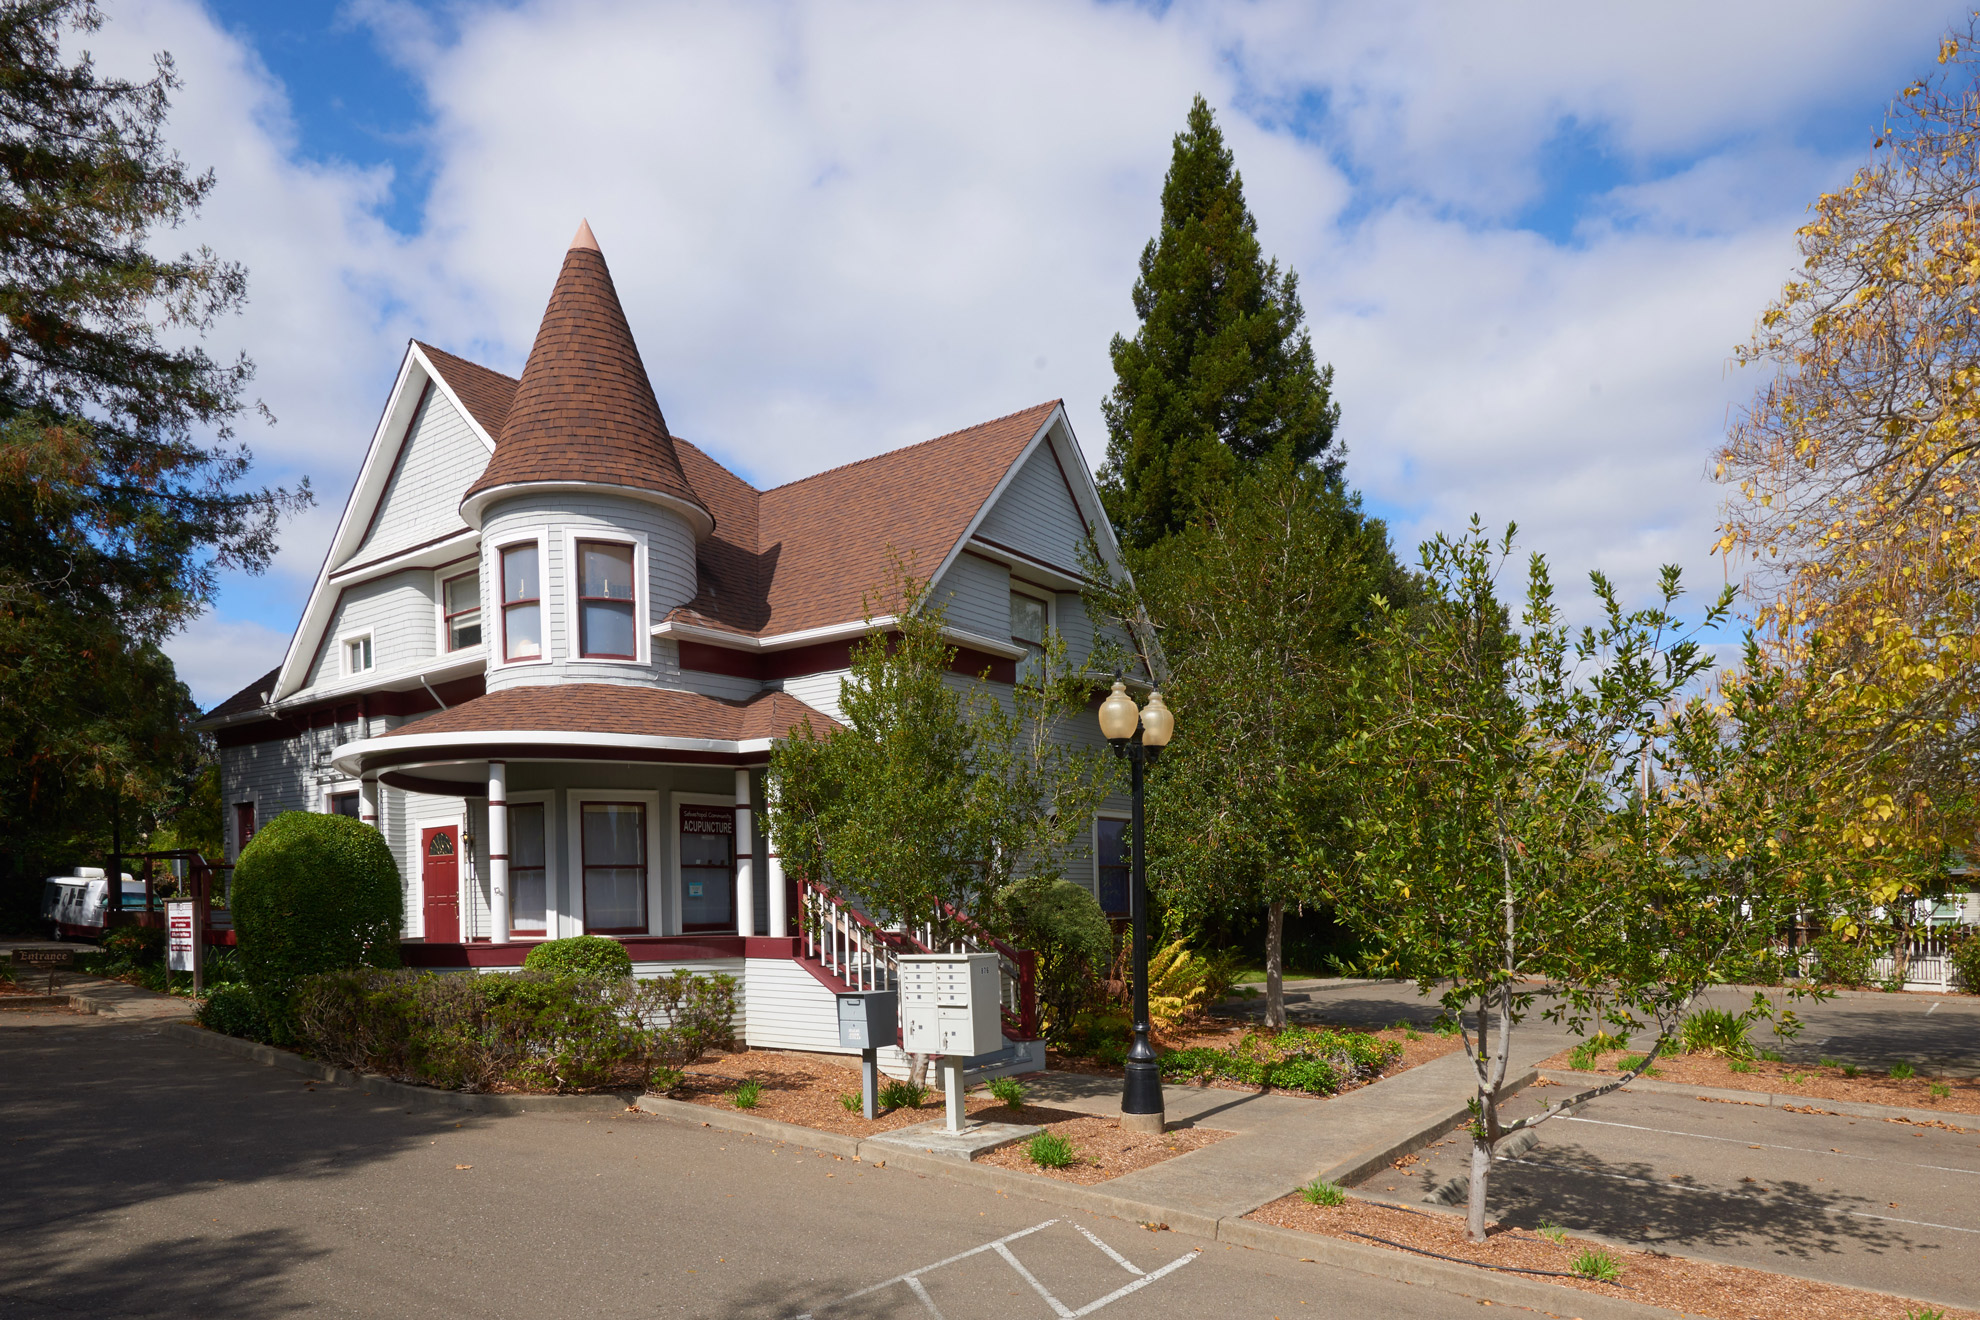 A photo of the Sebastopol Community Acupuncture Queen Anne Victorian office building